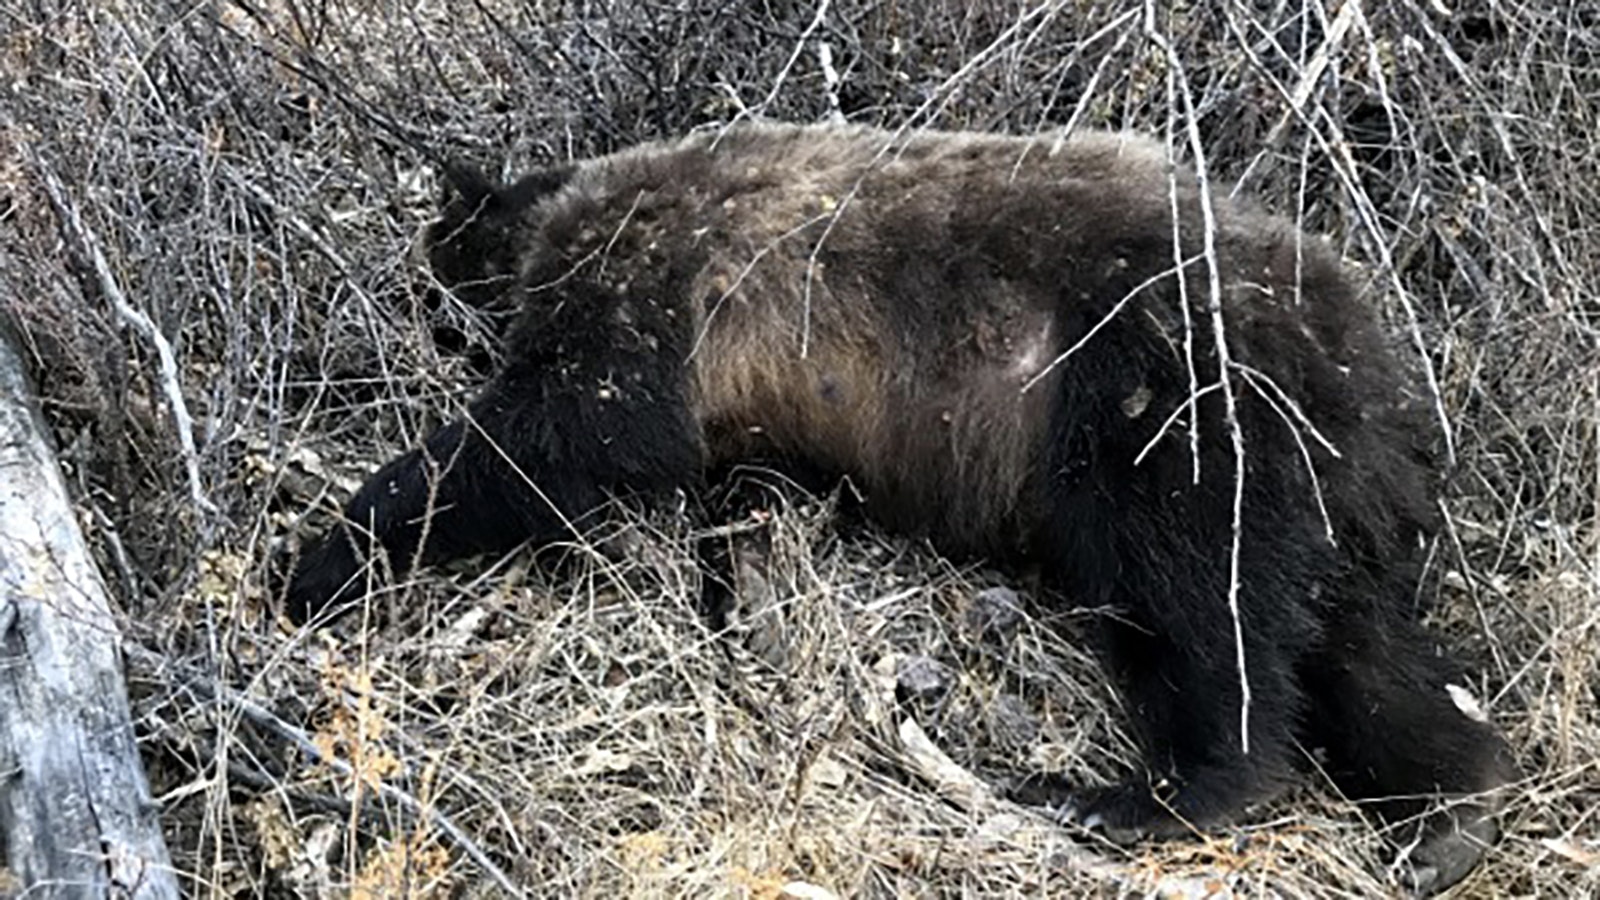 Hunting and fishing guide Ryan Aune of Cody shot and killed this grizzly bear when it charged him near the Clark’s Fork River in 2019. Investigators deemed the shooting justified self-defense, but Aune said killing the bear saddened him.